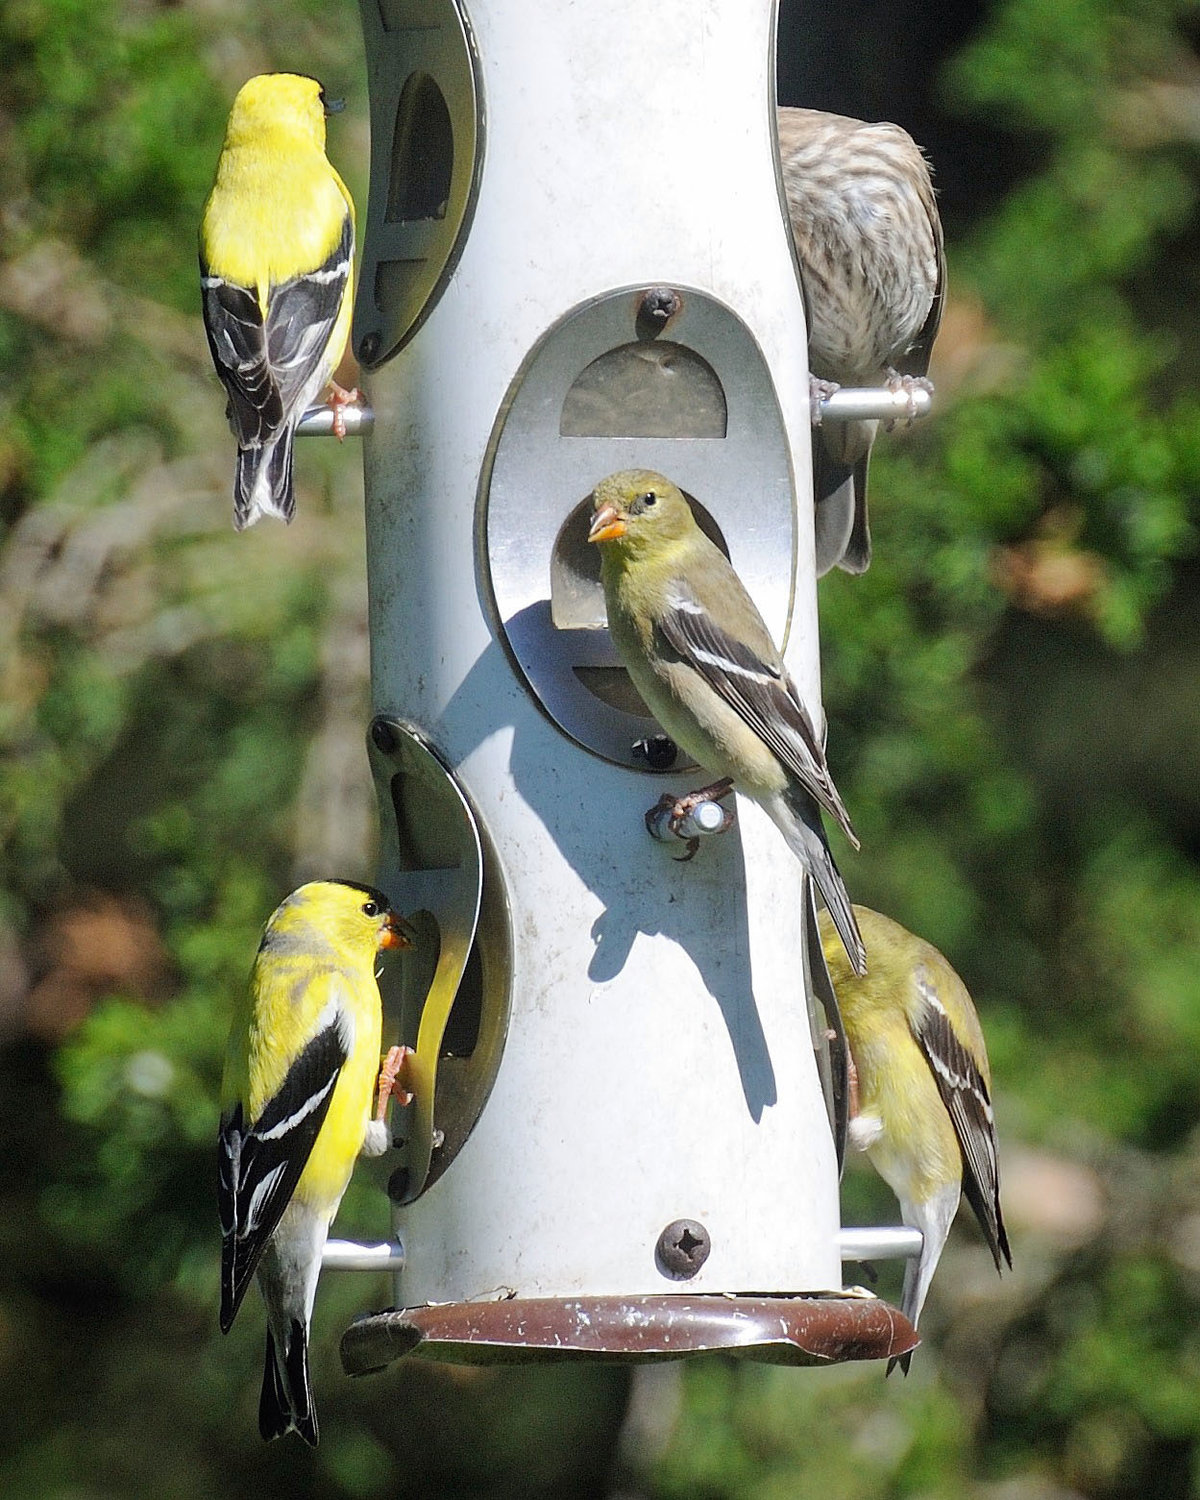 Some goldfinches are enjoying seed at a nearby feeder. In addition to cleaning the feeder, check your seed supply once in a while for mold or a musty smell (mold can be harmful to birds). Also, if you live in a bear habitat, you may have to get creative with where to put the bird feeder or curtail feeding altogether during bear season. Bears are attracted by seed, especially anise.